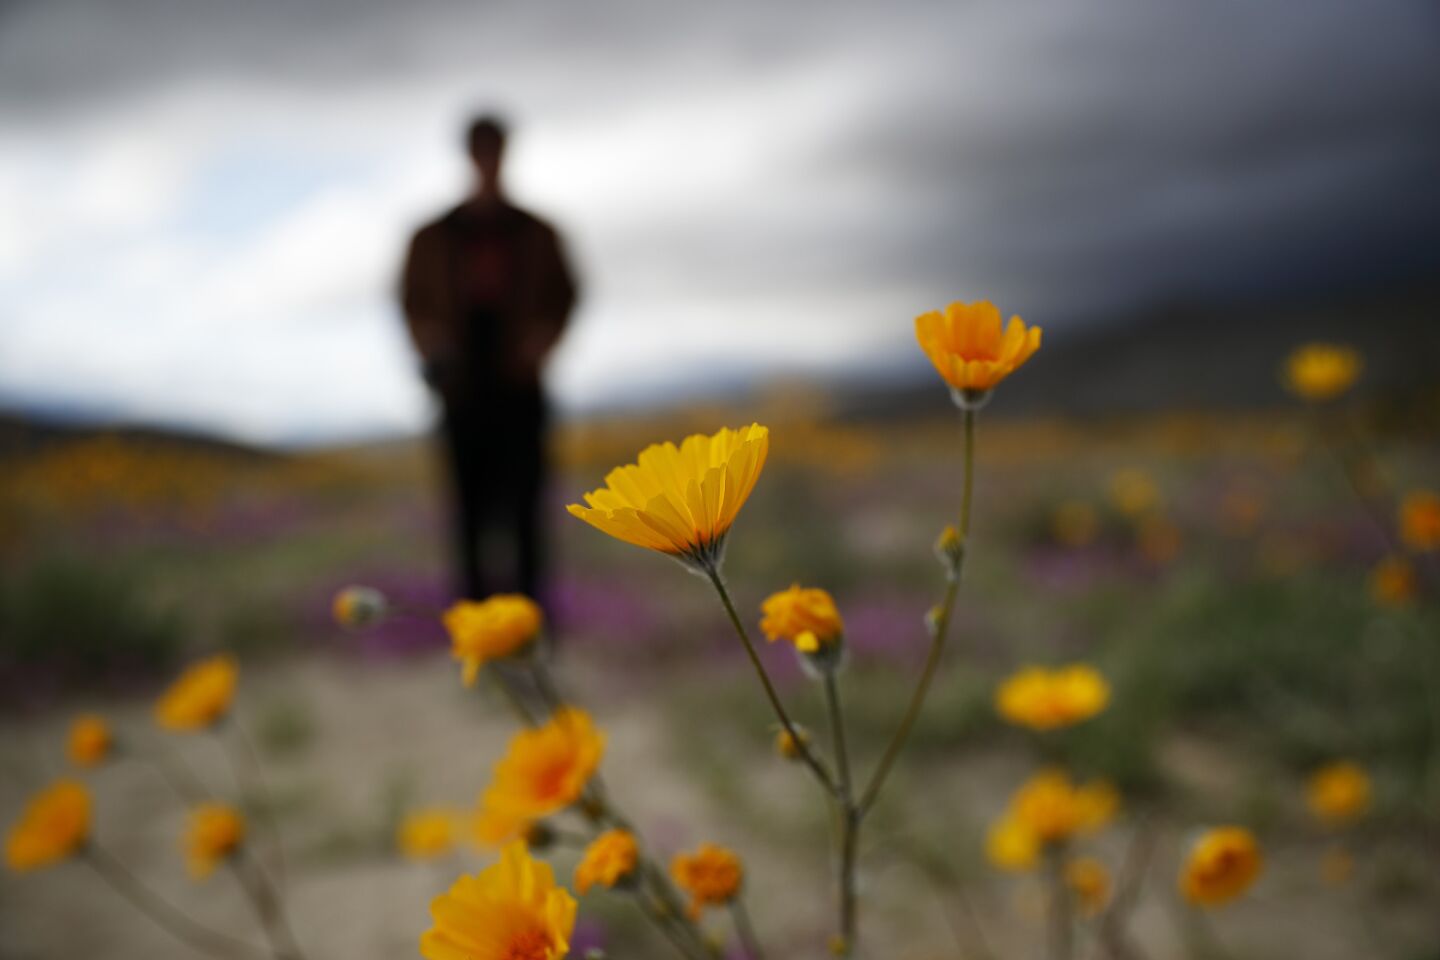 A wet year after a drought has triggered the great bloom of wildflowers in parts of California, including near Borrego Springs.